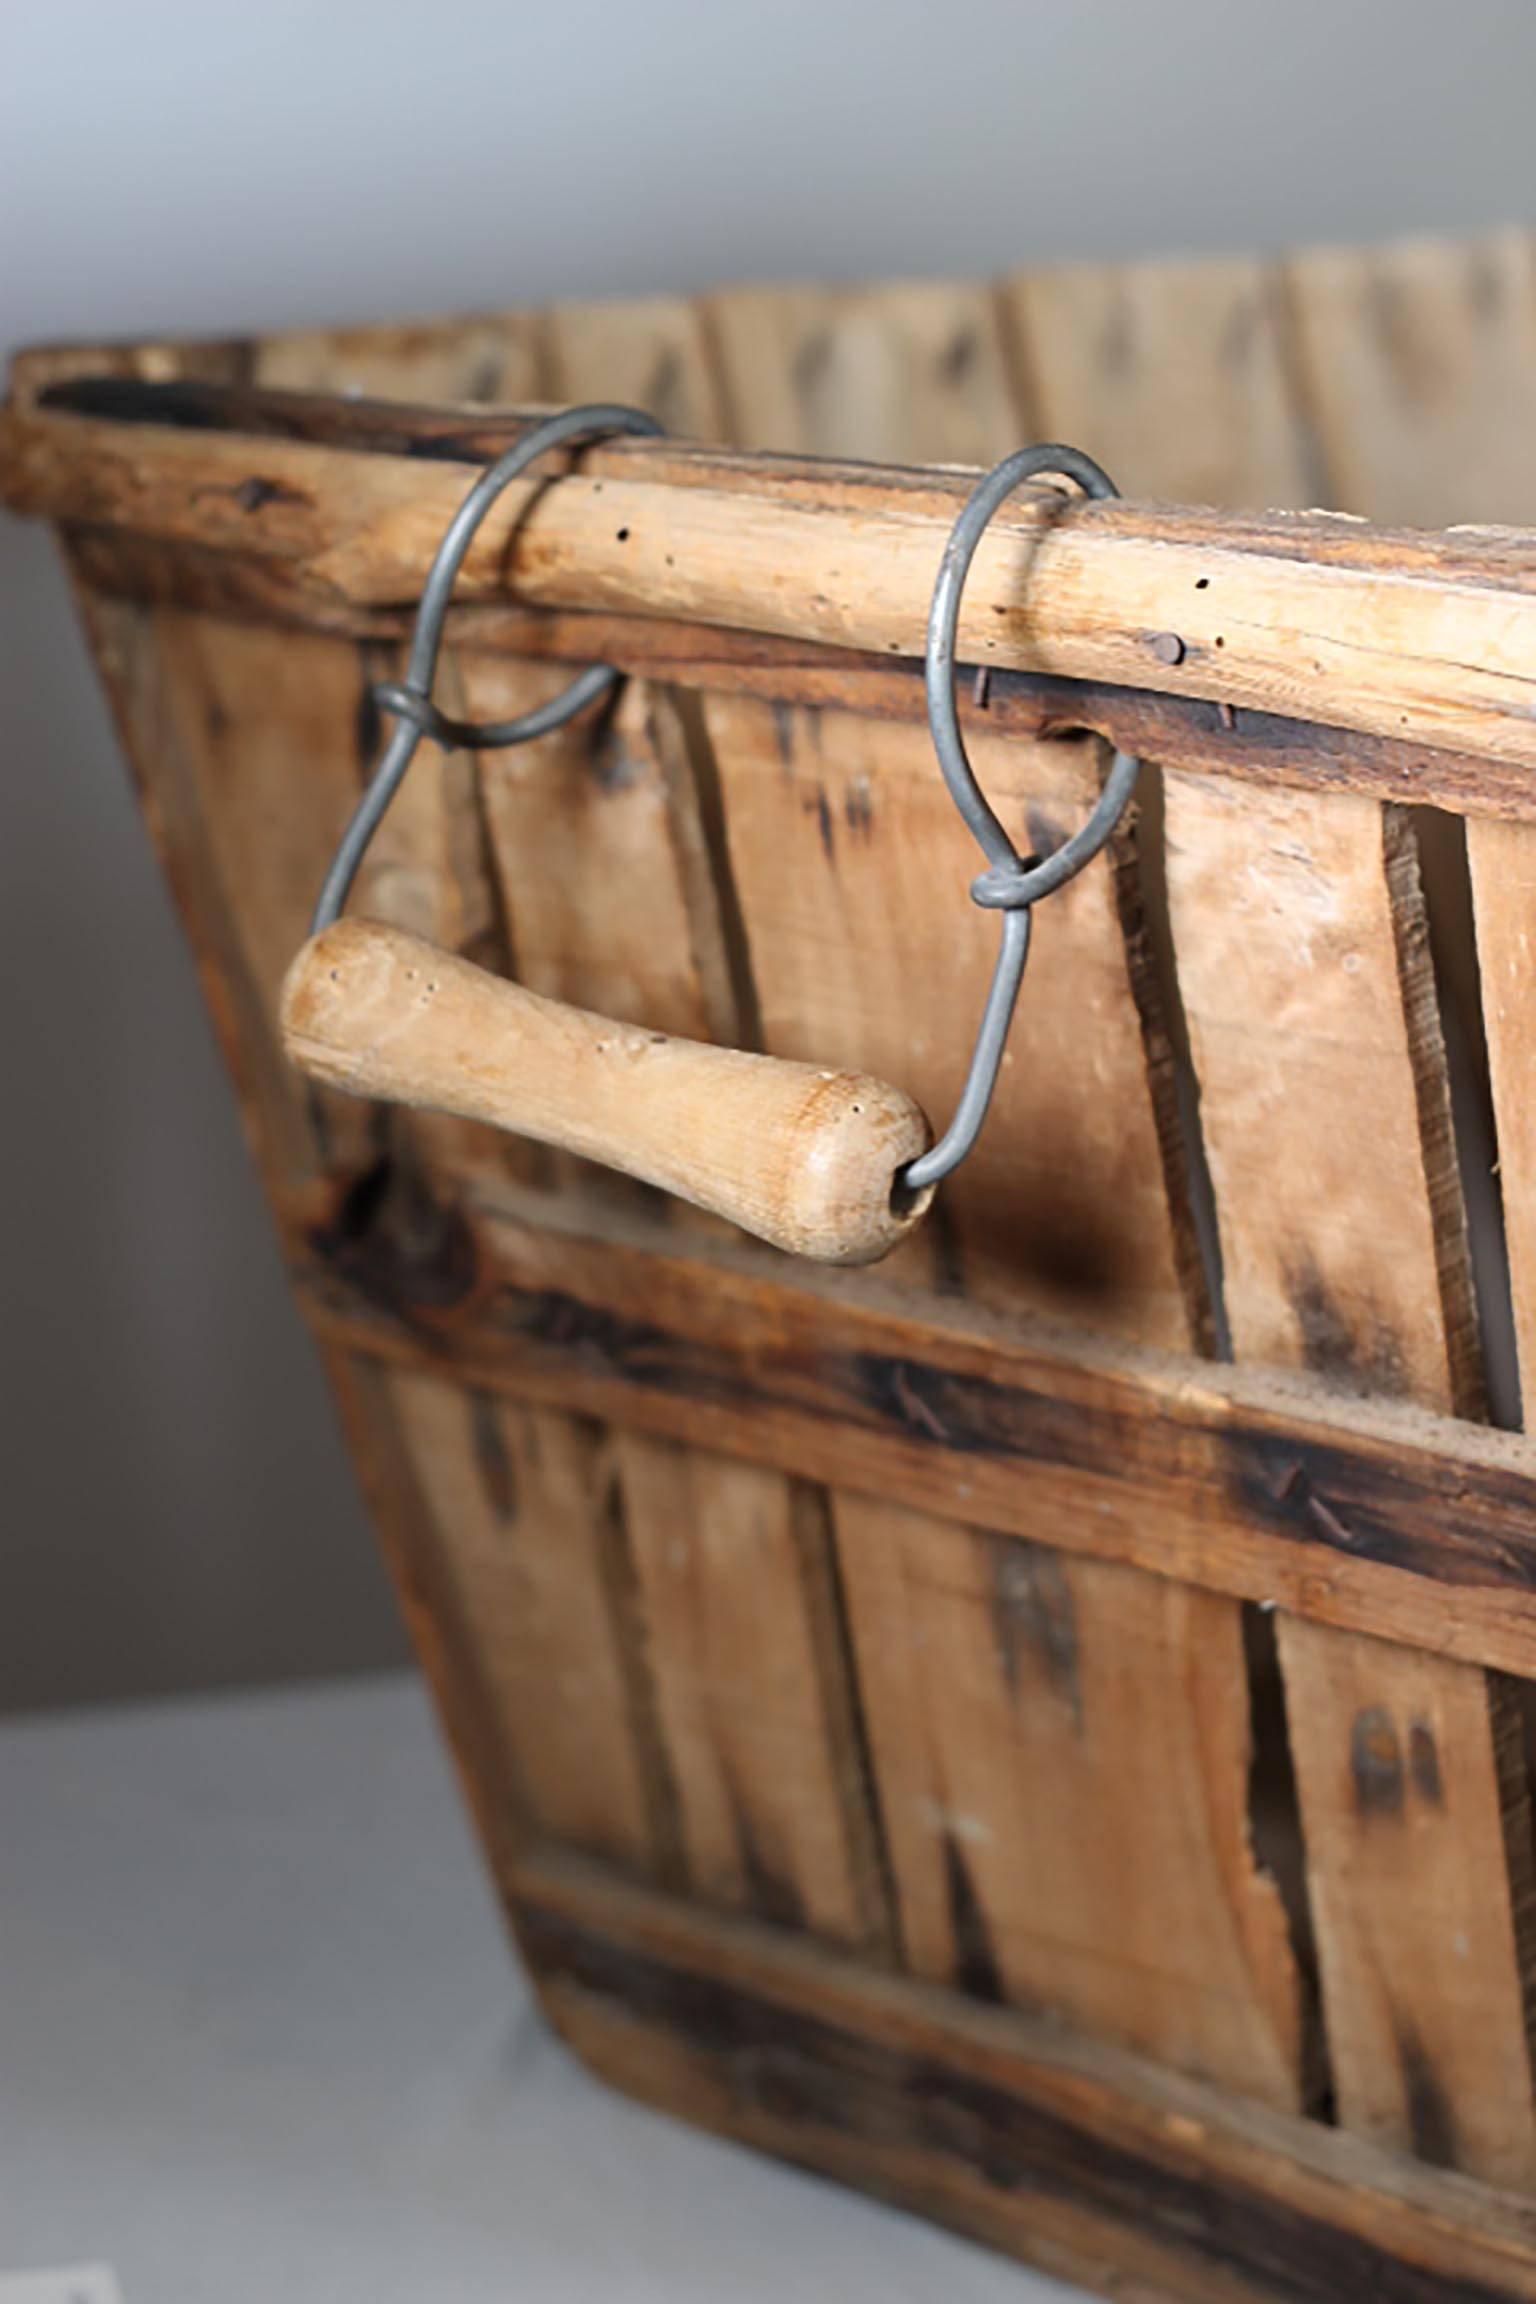 Antique apple orchard basket with metal and wooden handles, circa 1930s-1940s.